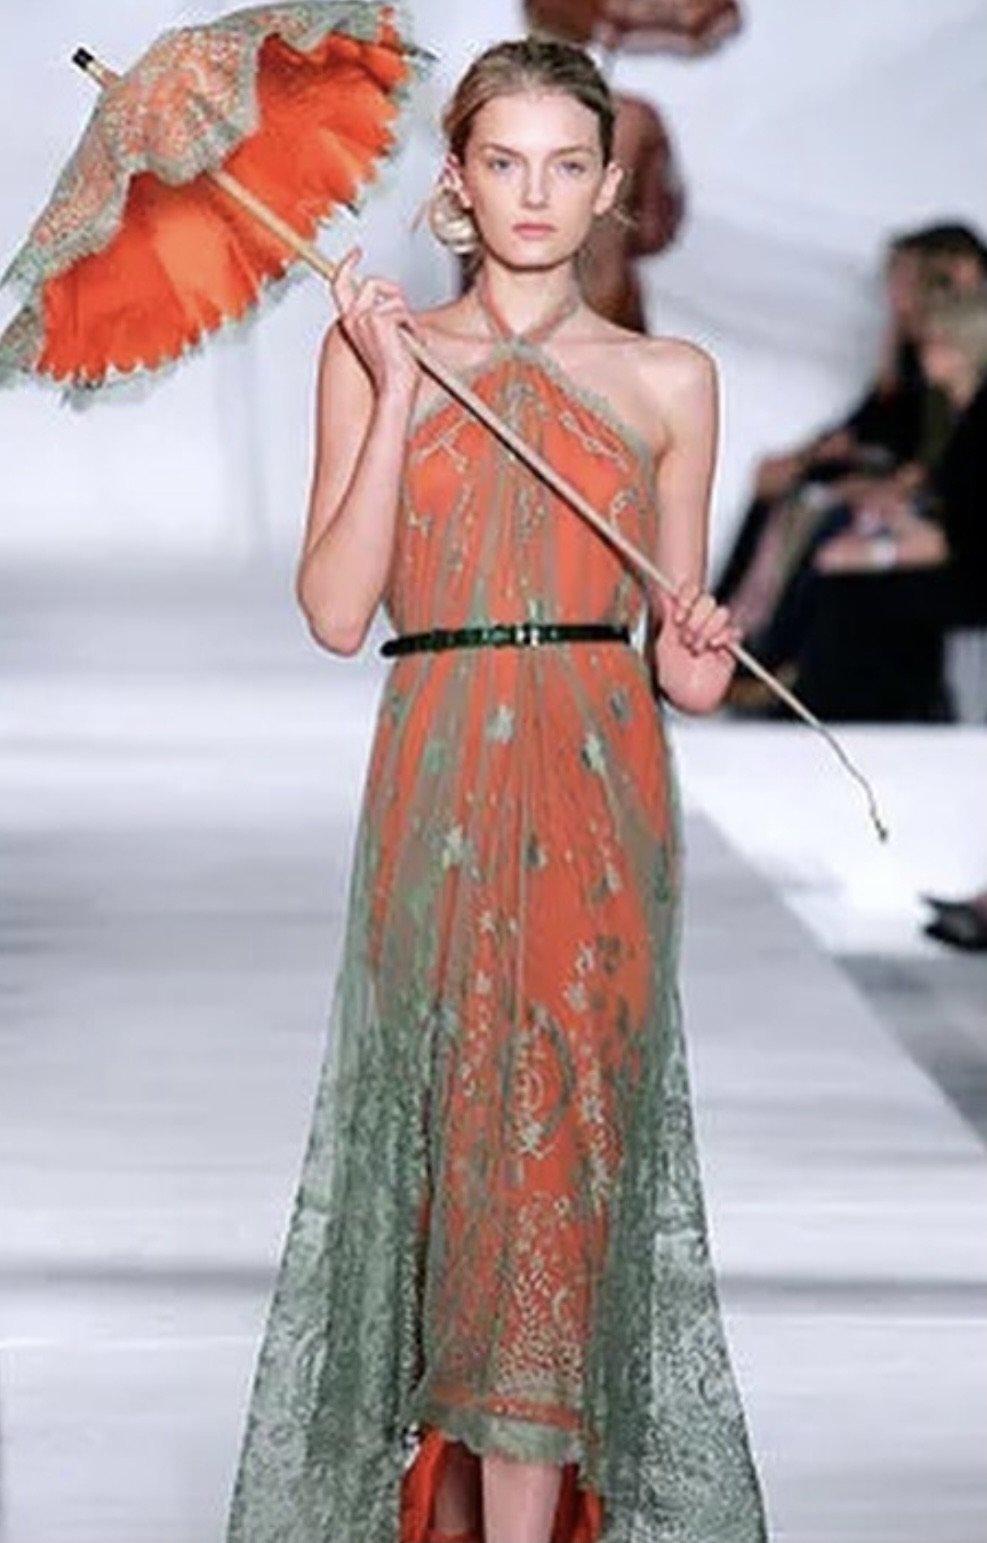 Beautiful Hermes 2006 Runway  dress from Jean Paul Gaultier era for Hermes.
Green Guipure lace with scalloped edges ,jersey orange lining and  embroidered Hermes Paris print on lace 
Excellent  condition.Please keep in mind that this is a vintage